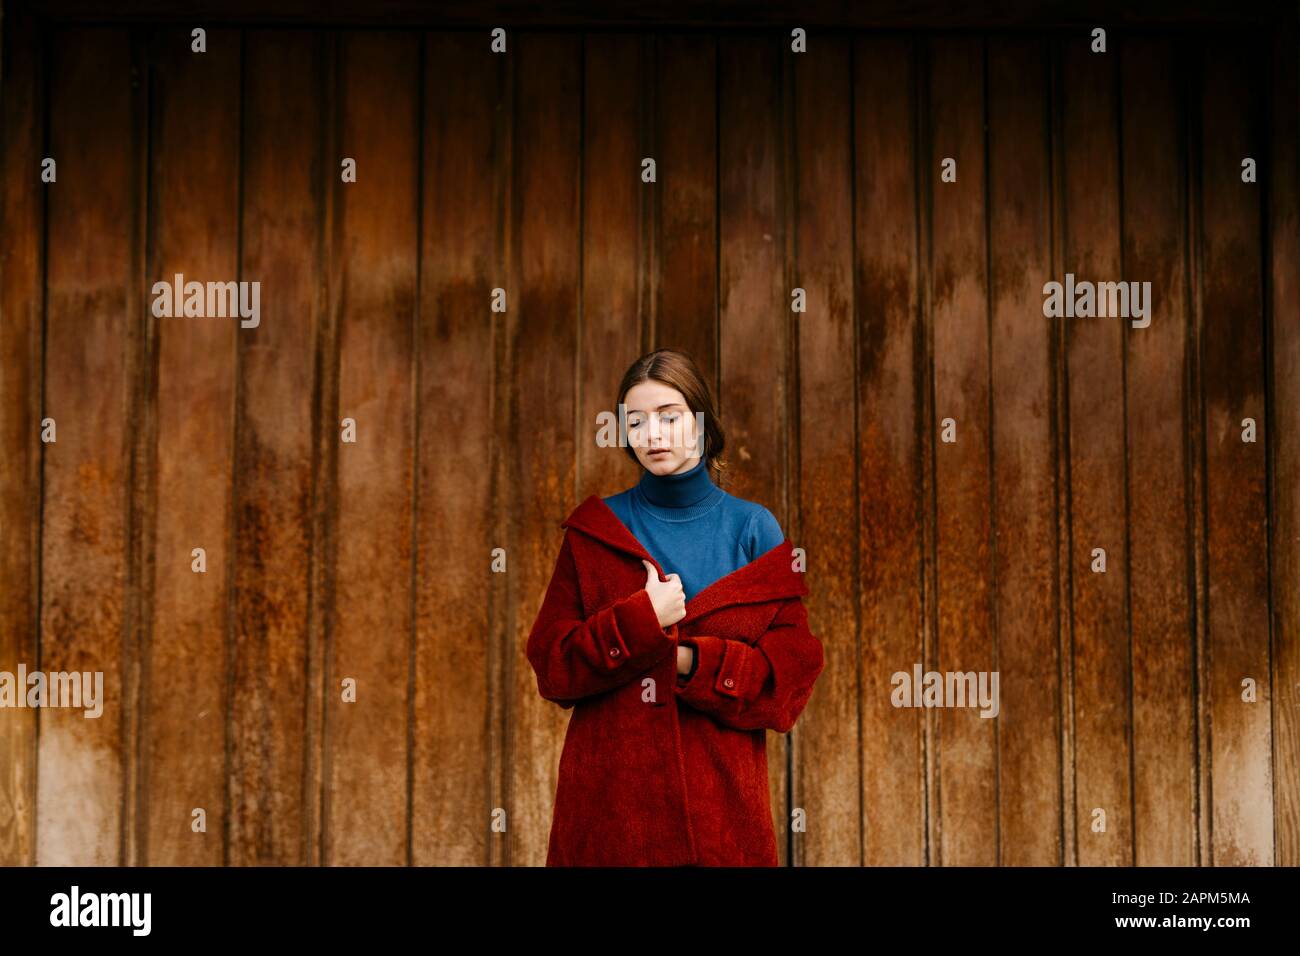 Close up portrait of woman with blue turtleneck pullover and red coat in front of a wooden door Stock Photo